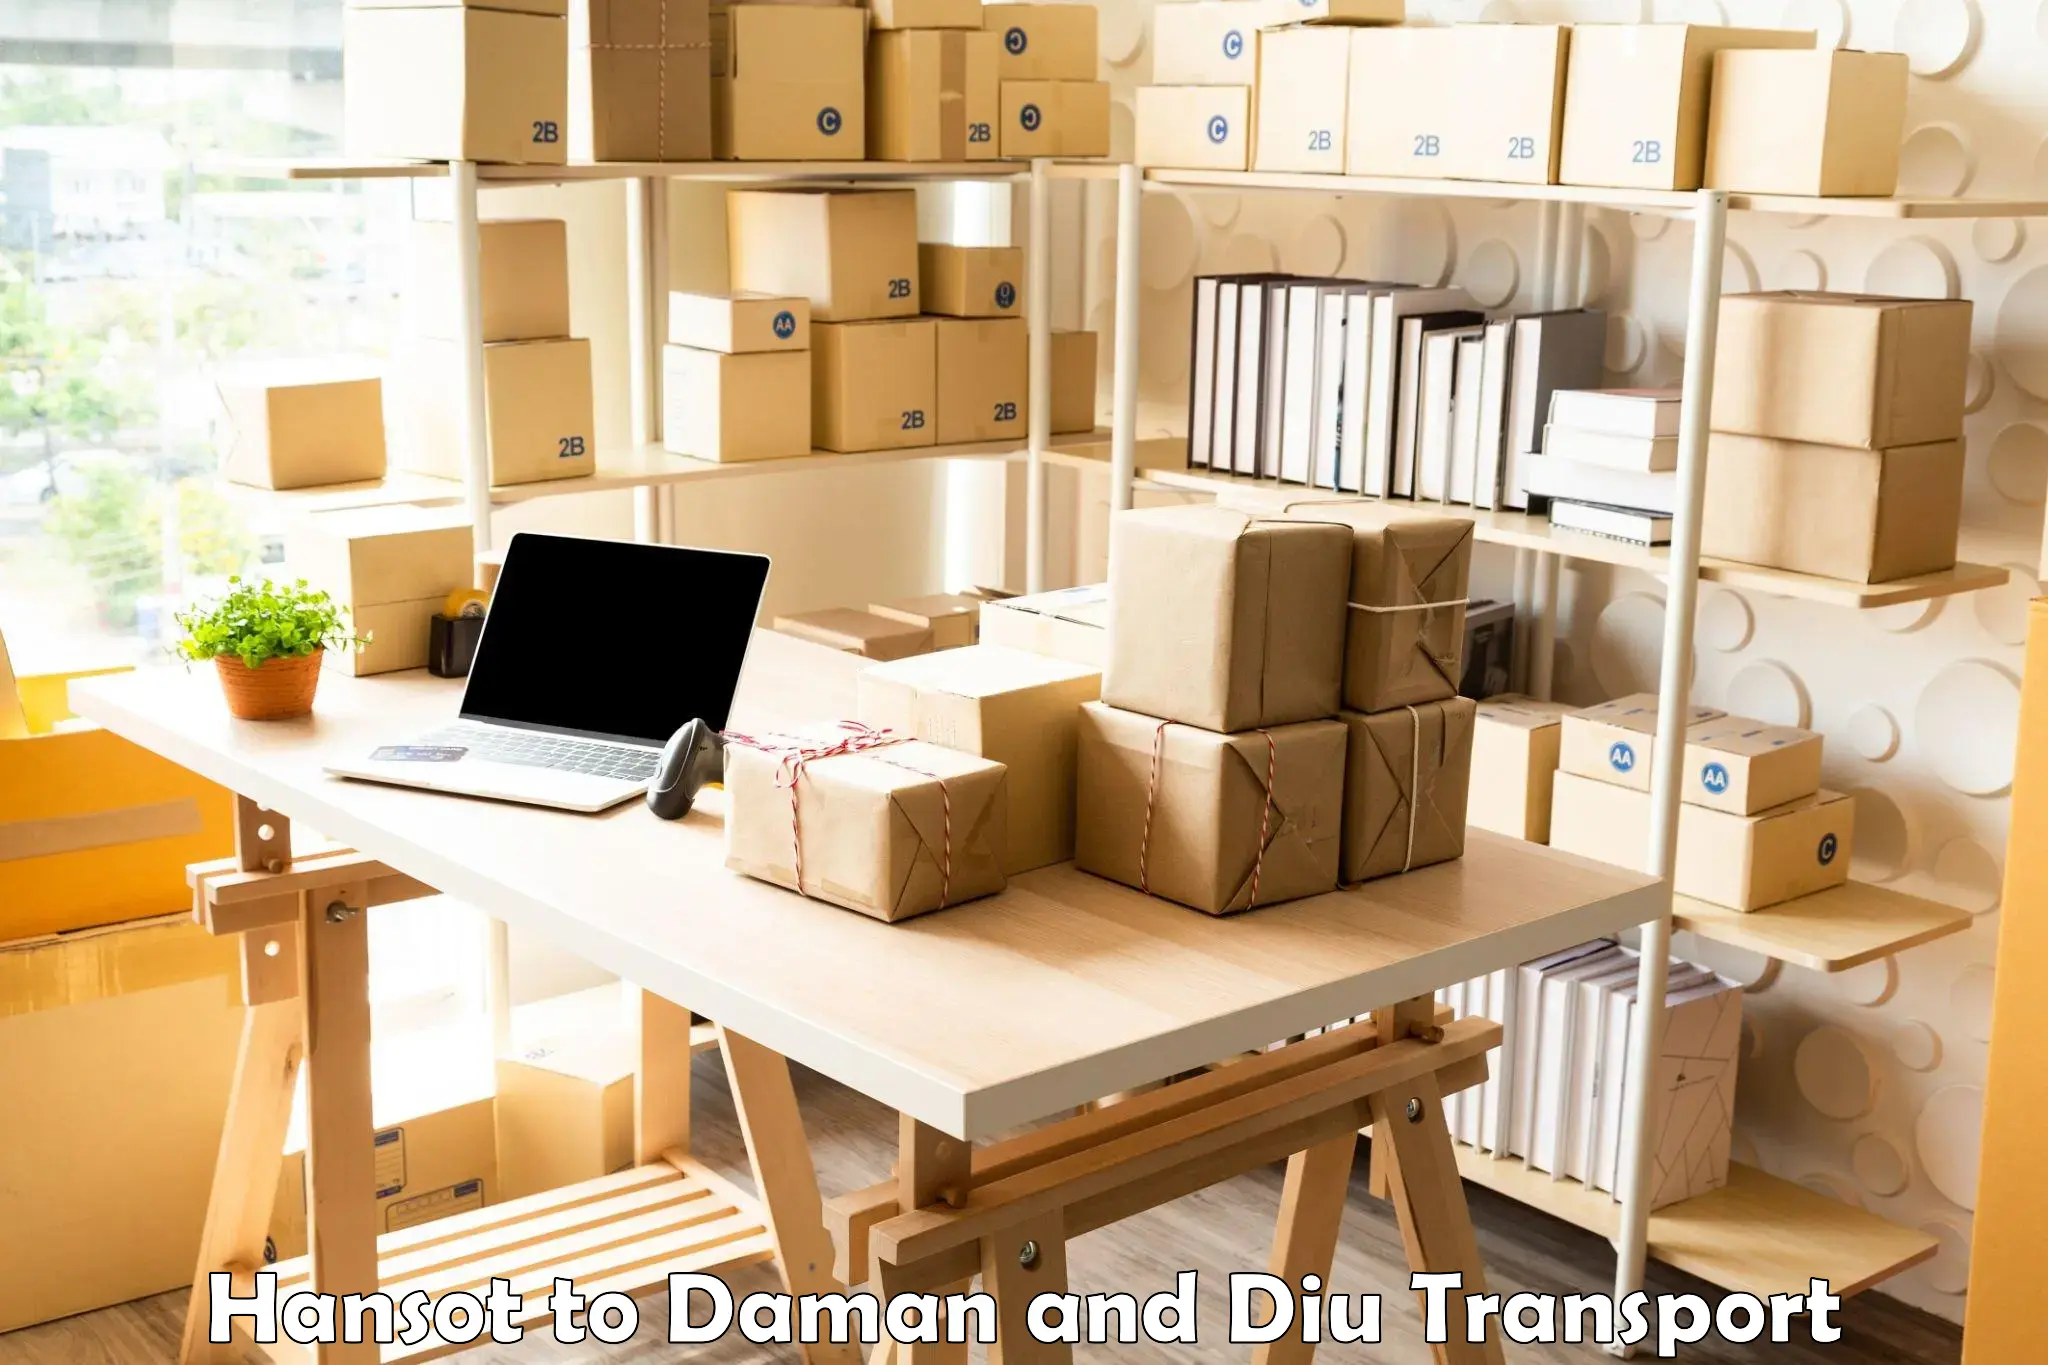 Road transport online services Hansot to Diu